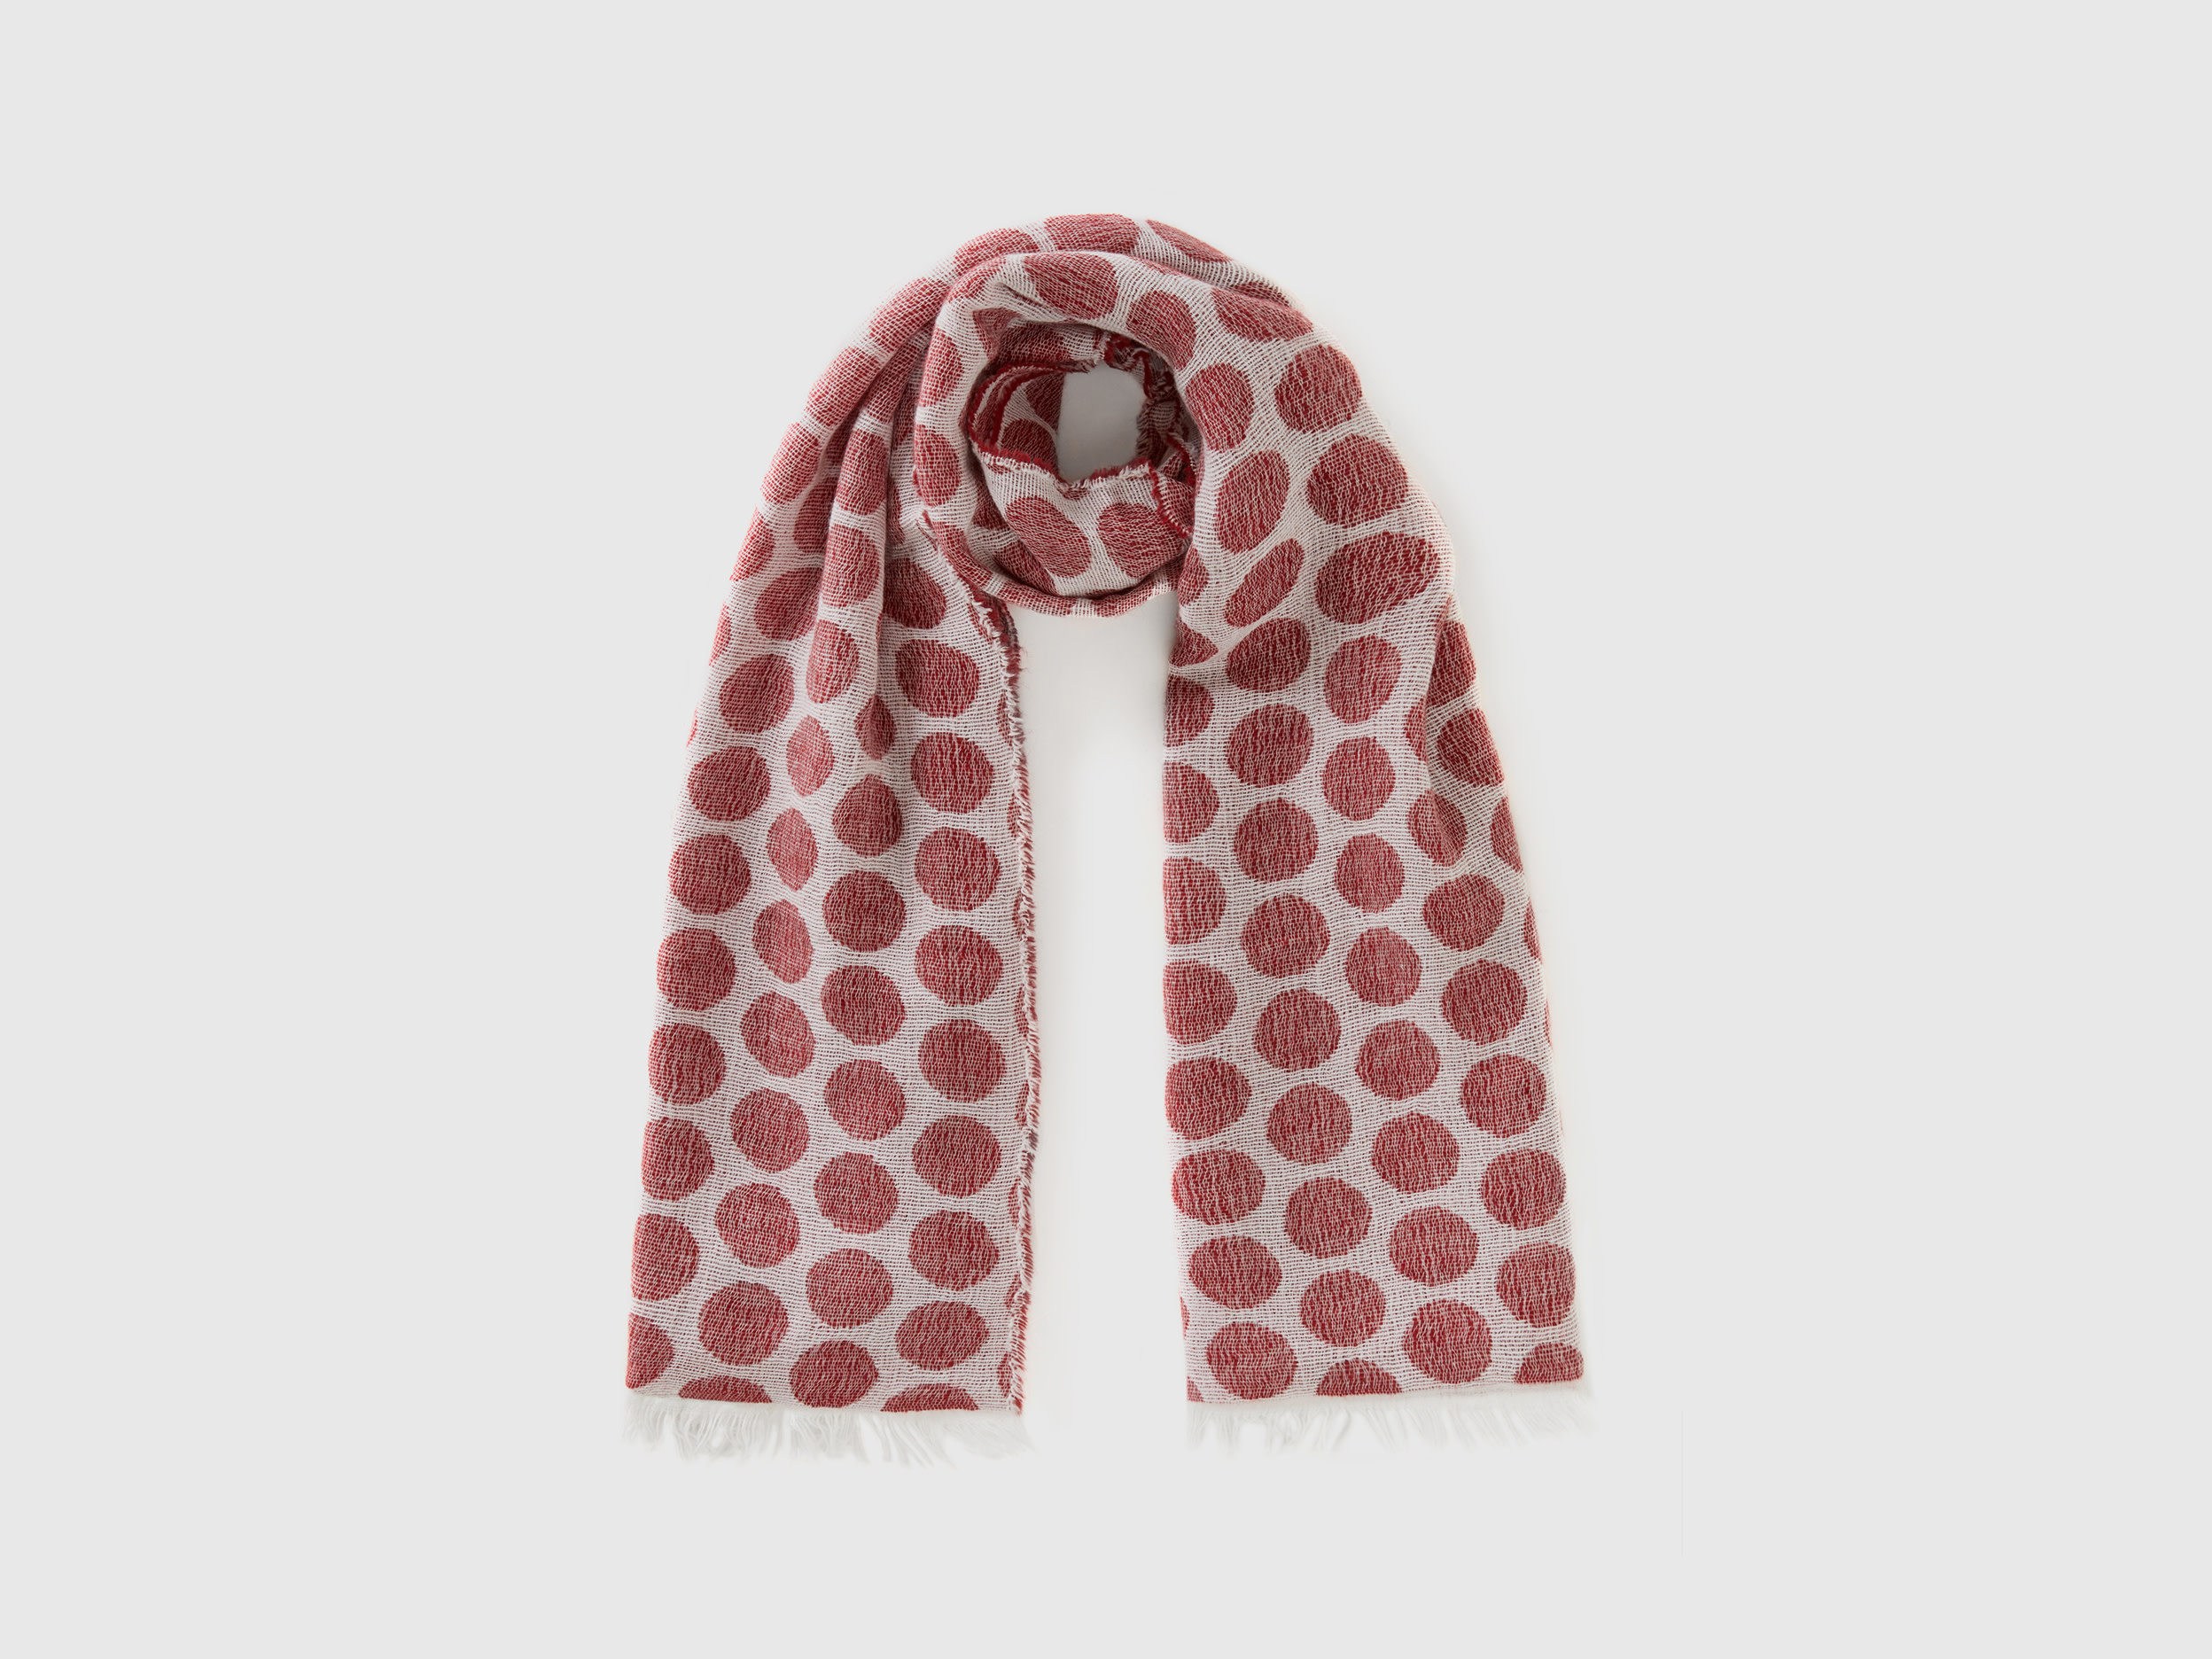 Benetton, Red Polka Dot Scarf, size OS, Red, Women